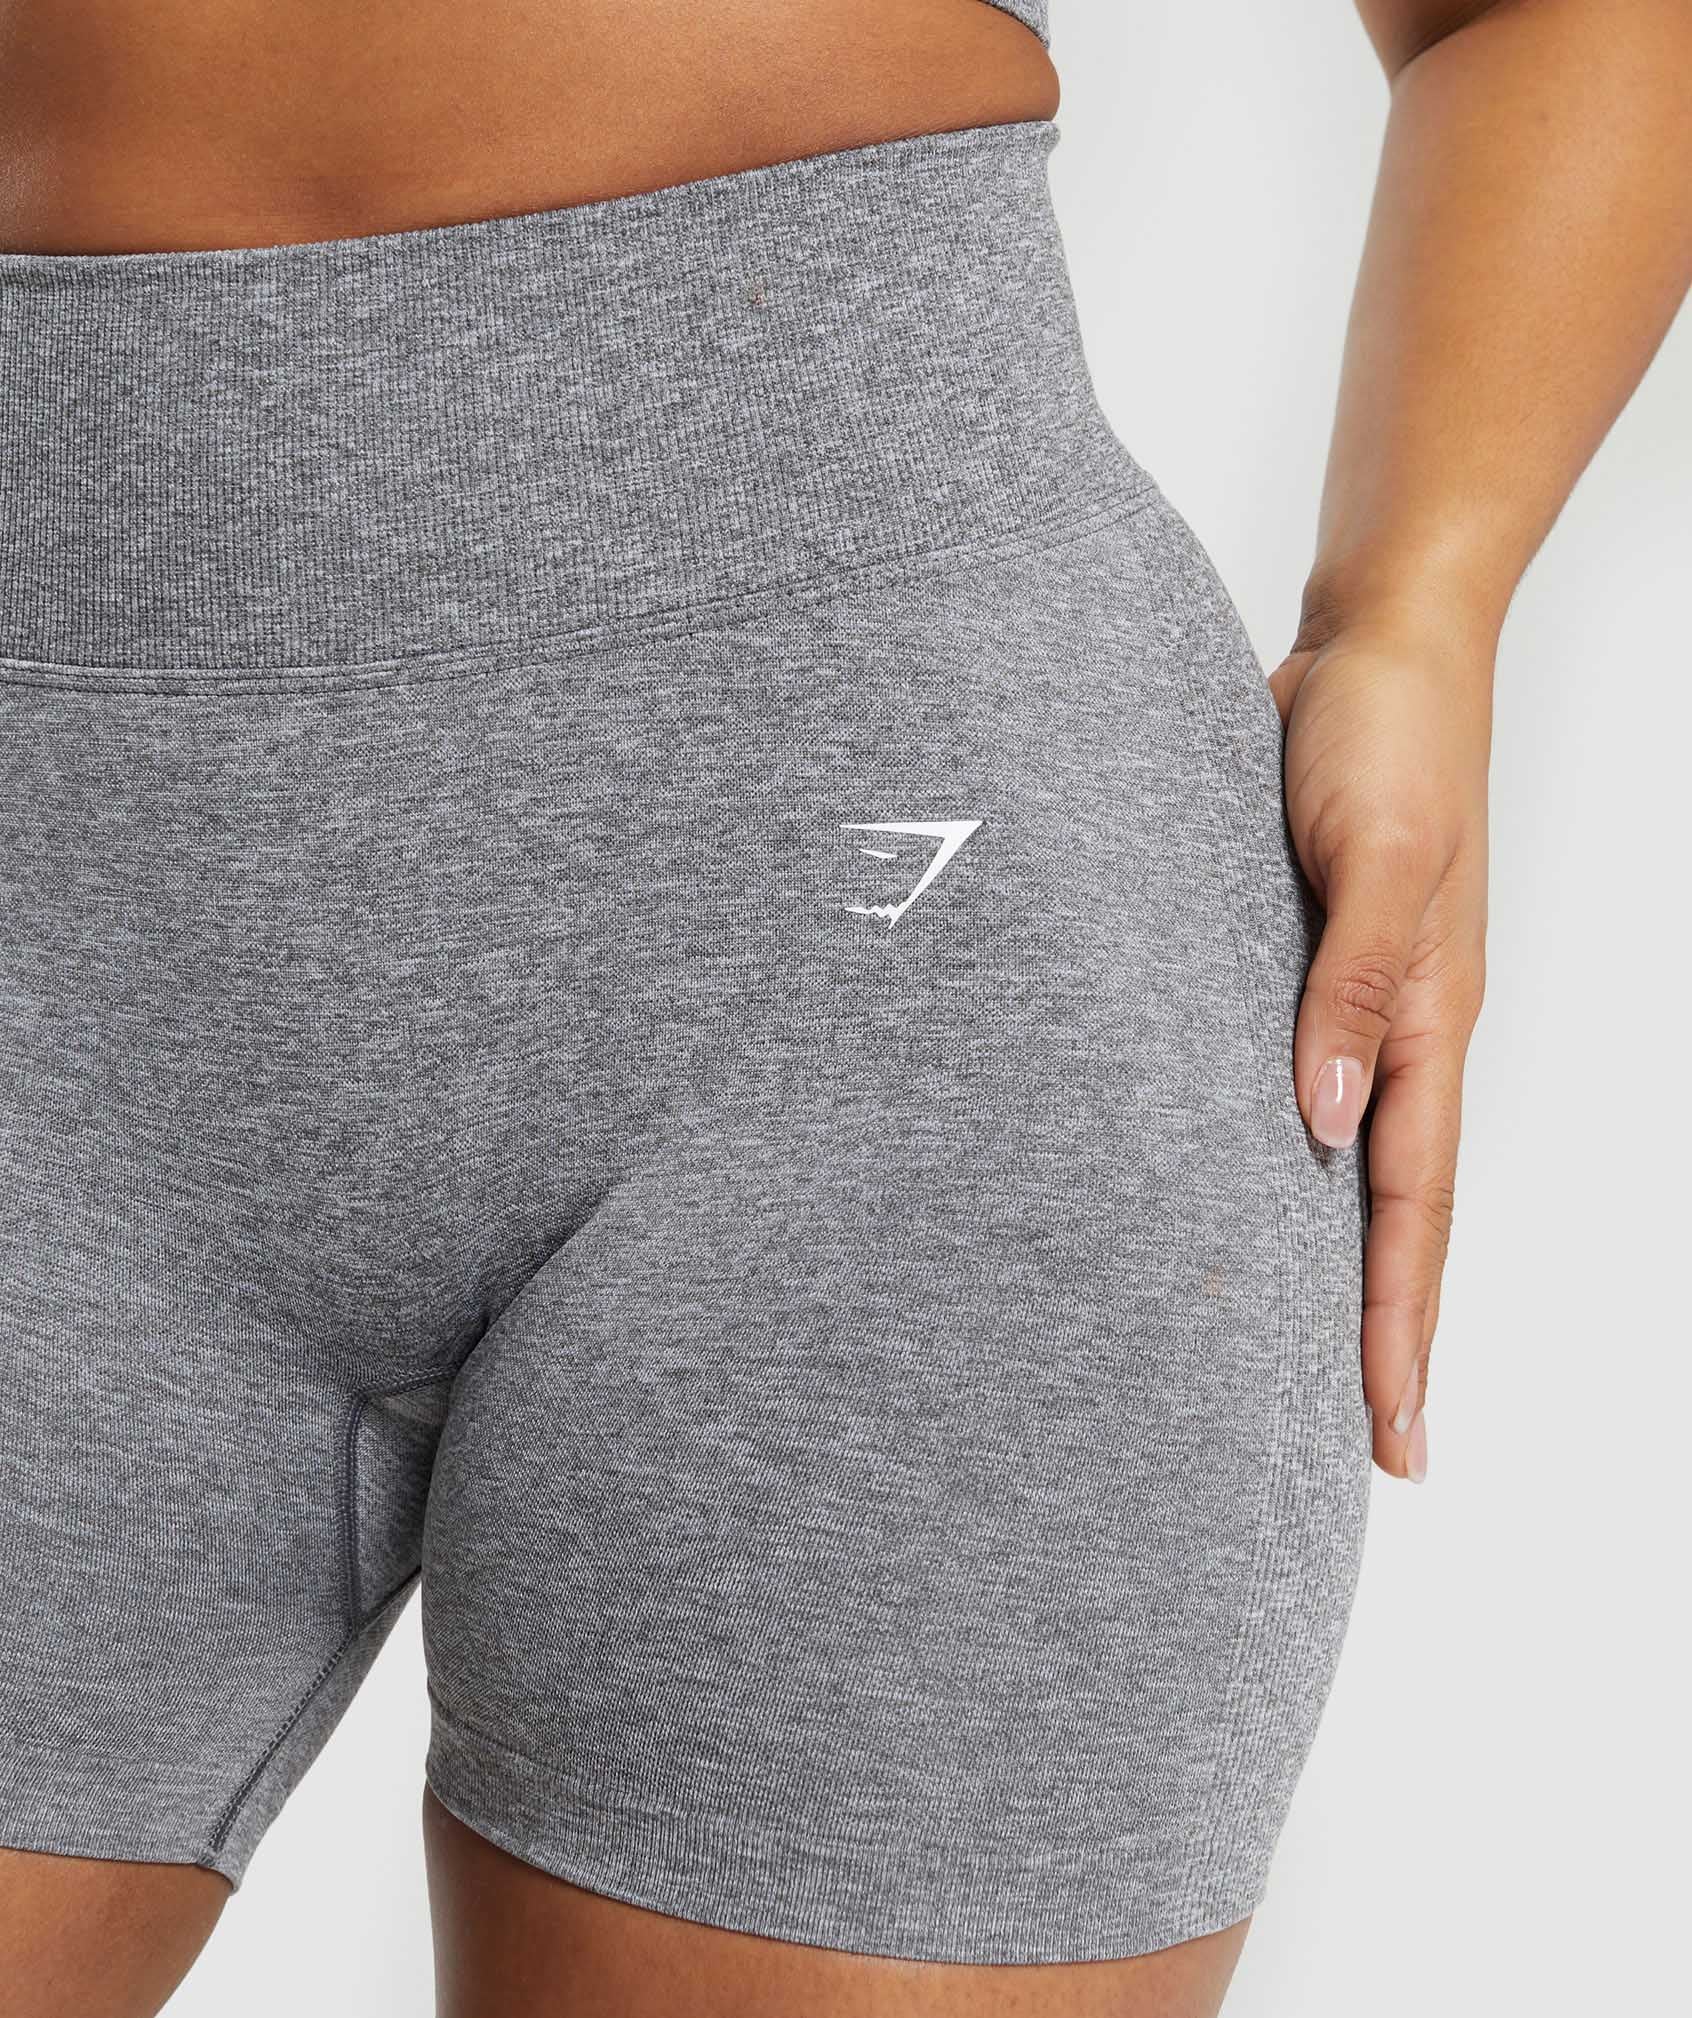 Lift Contour Seamless Shorts in Brushed Grey/White Marl - view 6